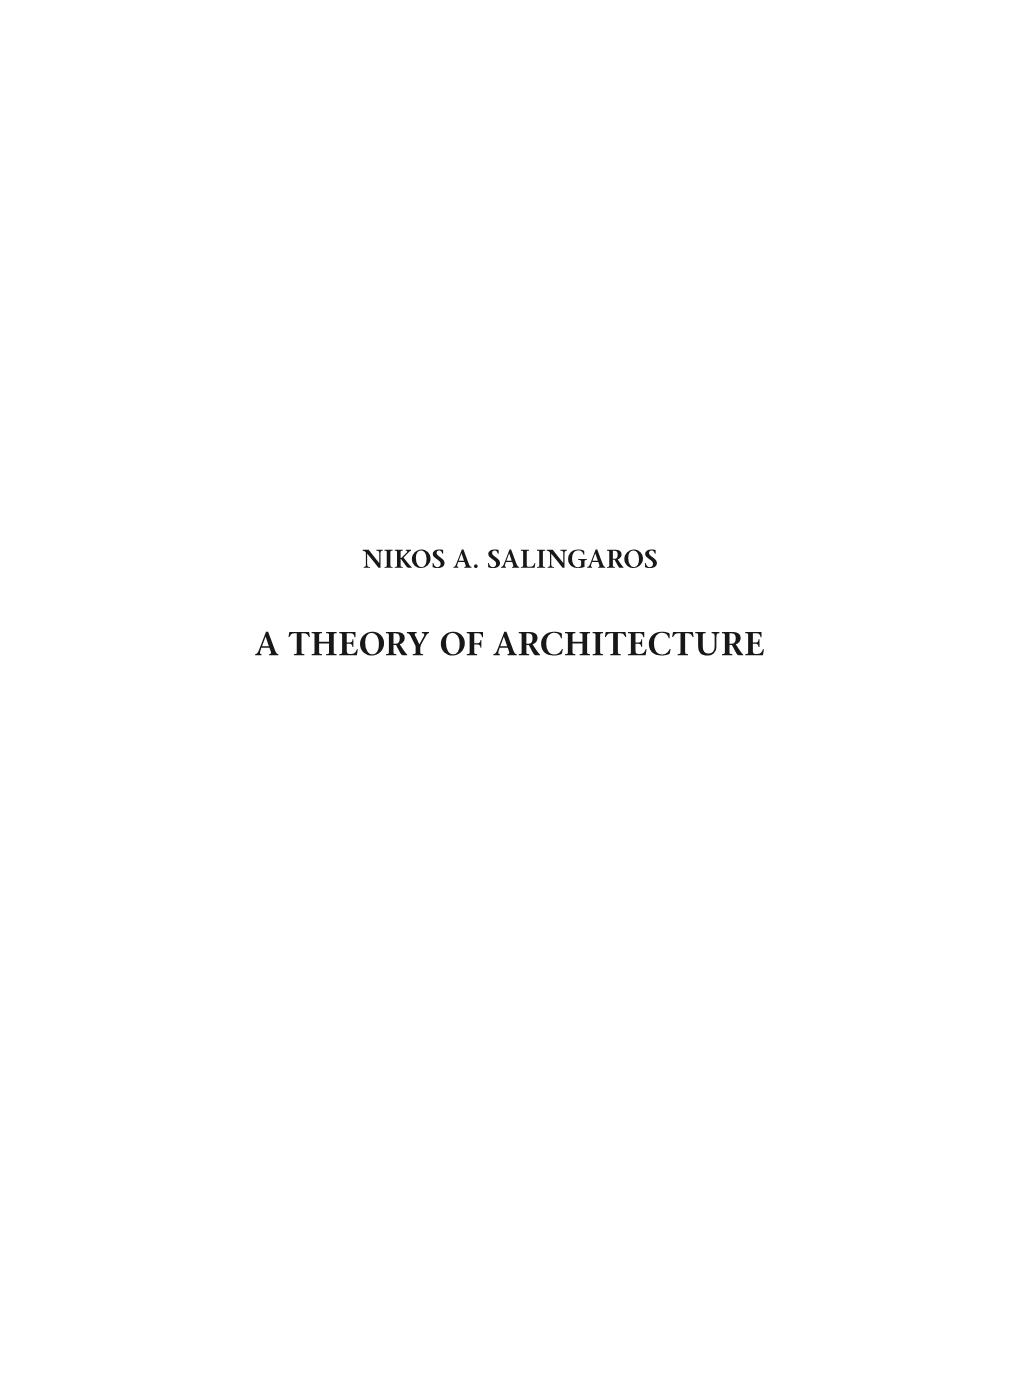 A THEORY of ARCHITECTURE © Nikos A